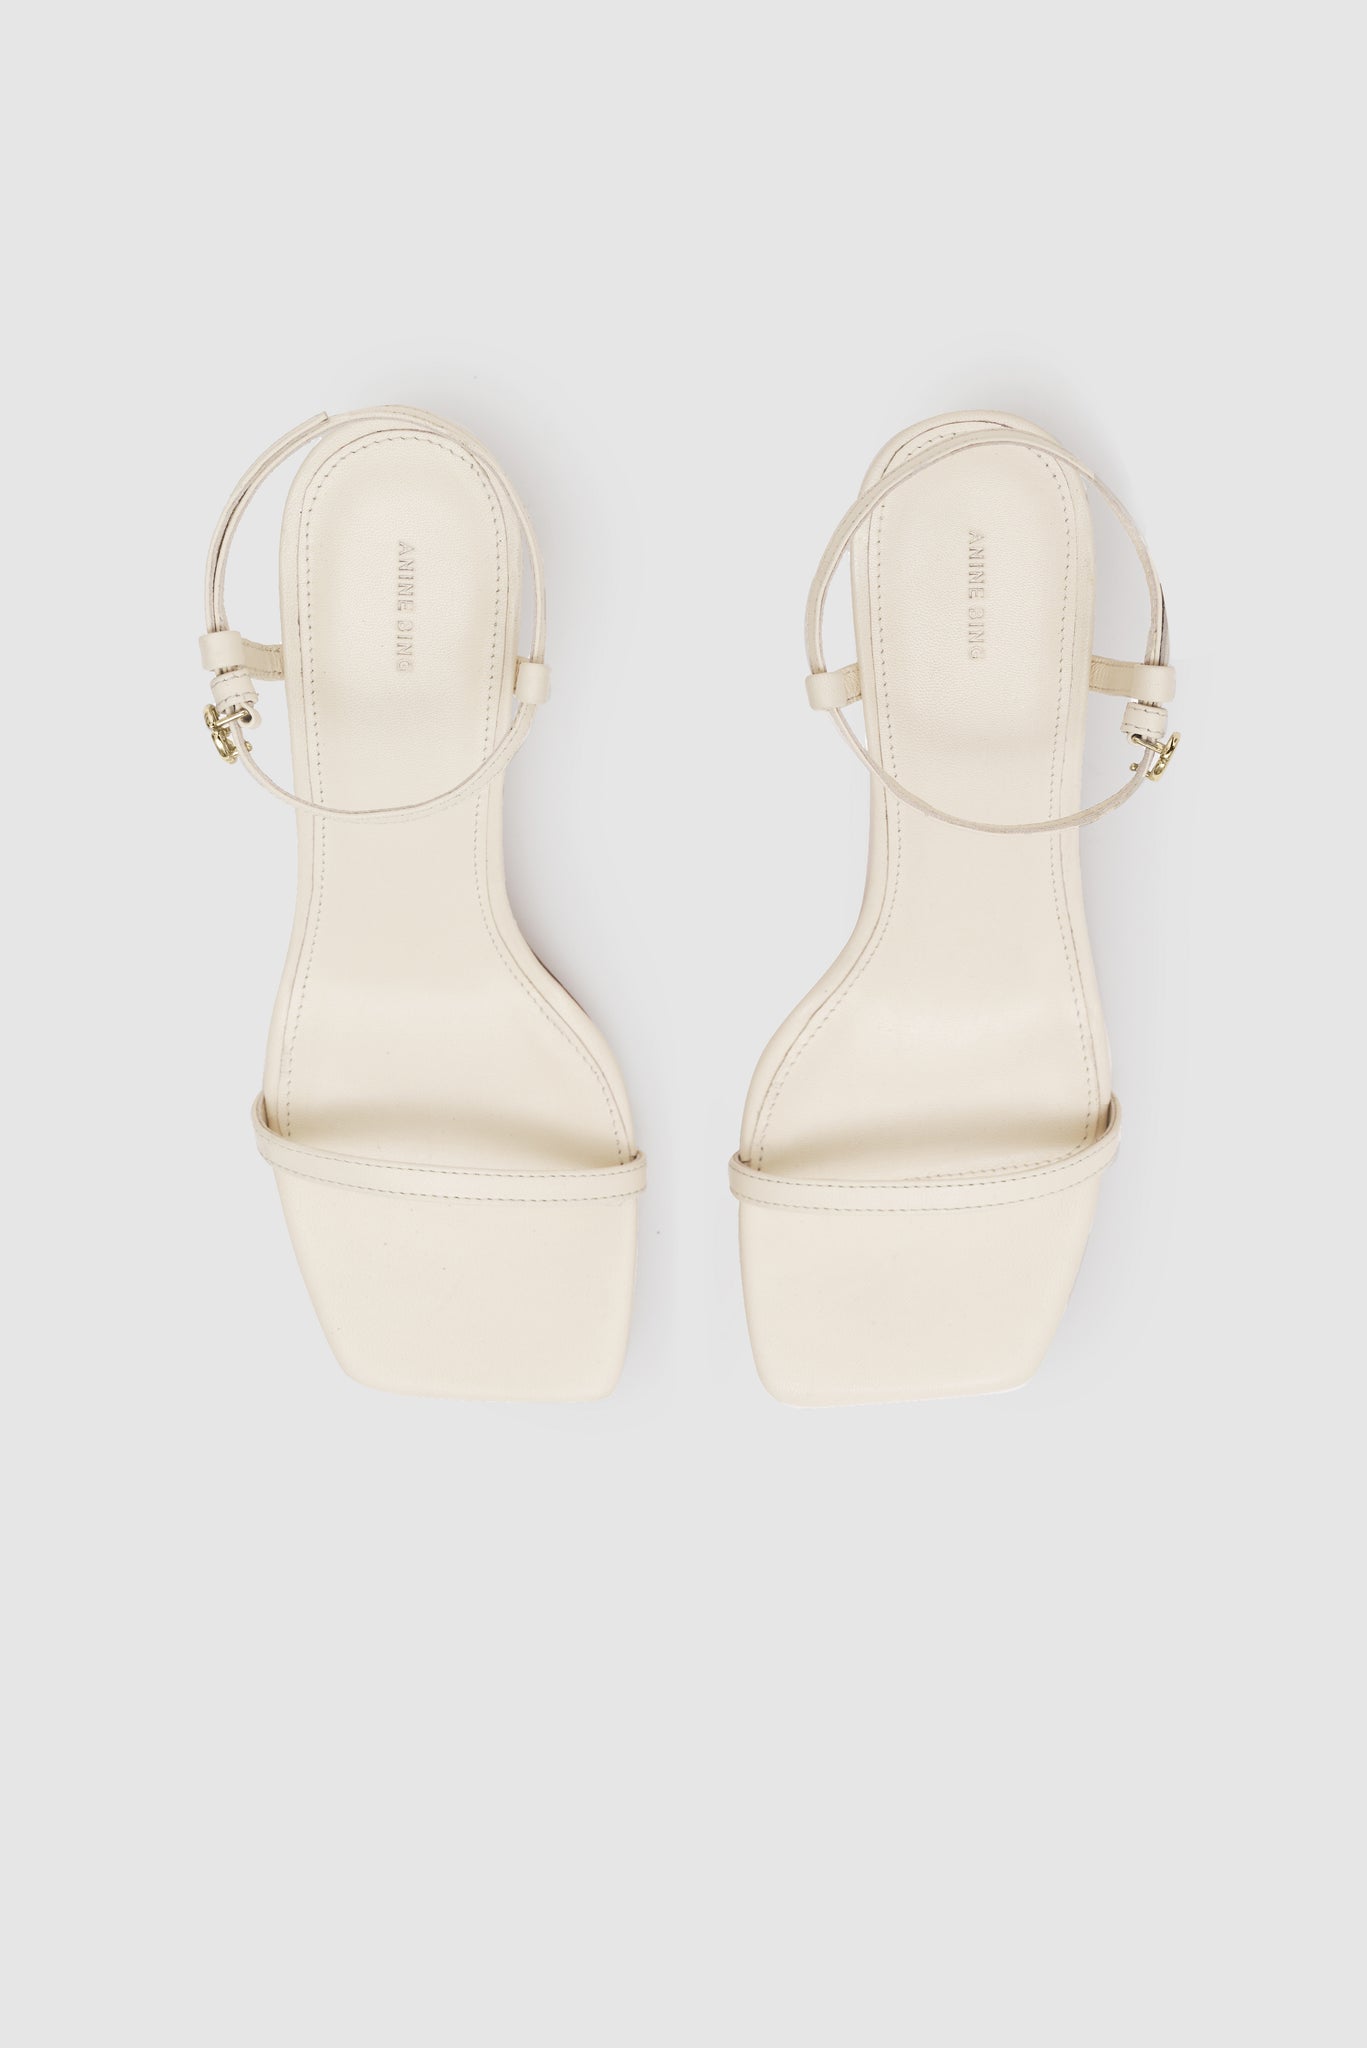 ANINE BING Invisible Sandals - Cream - Top Pair View